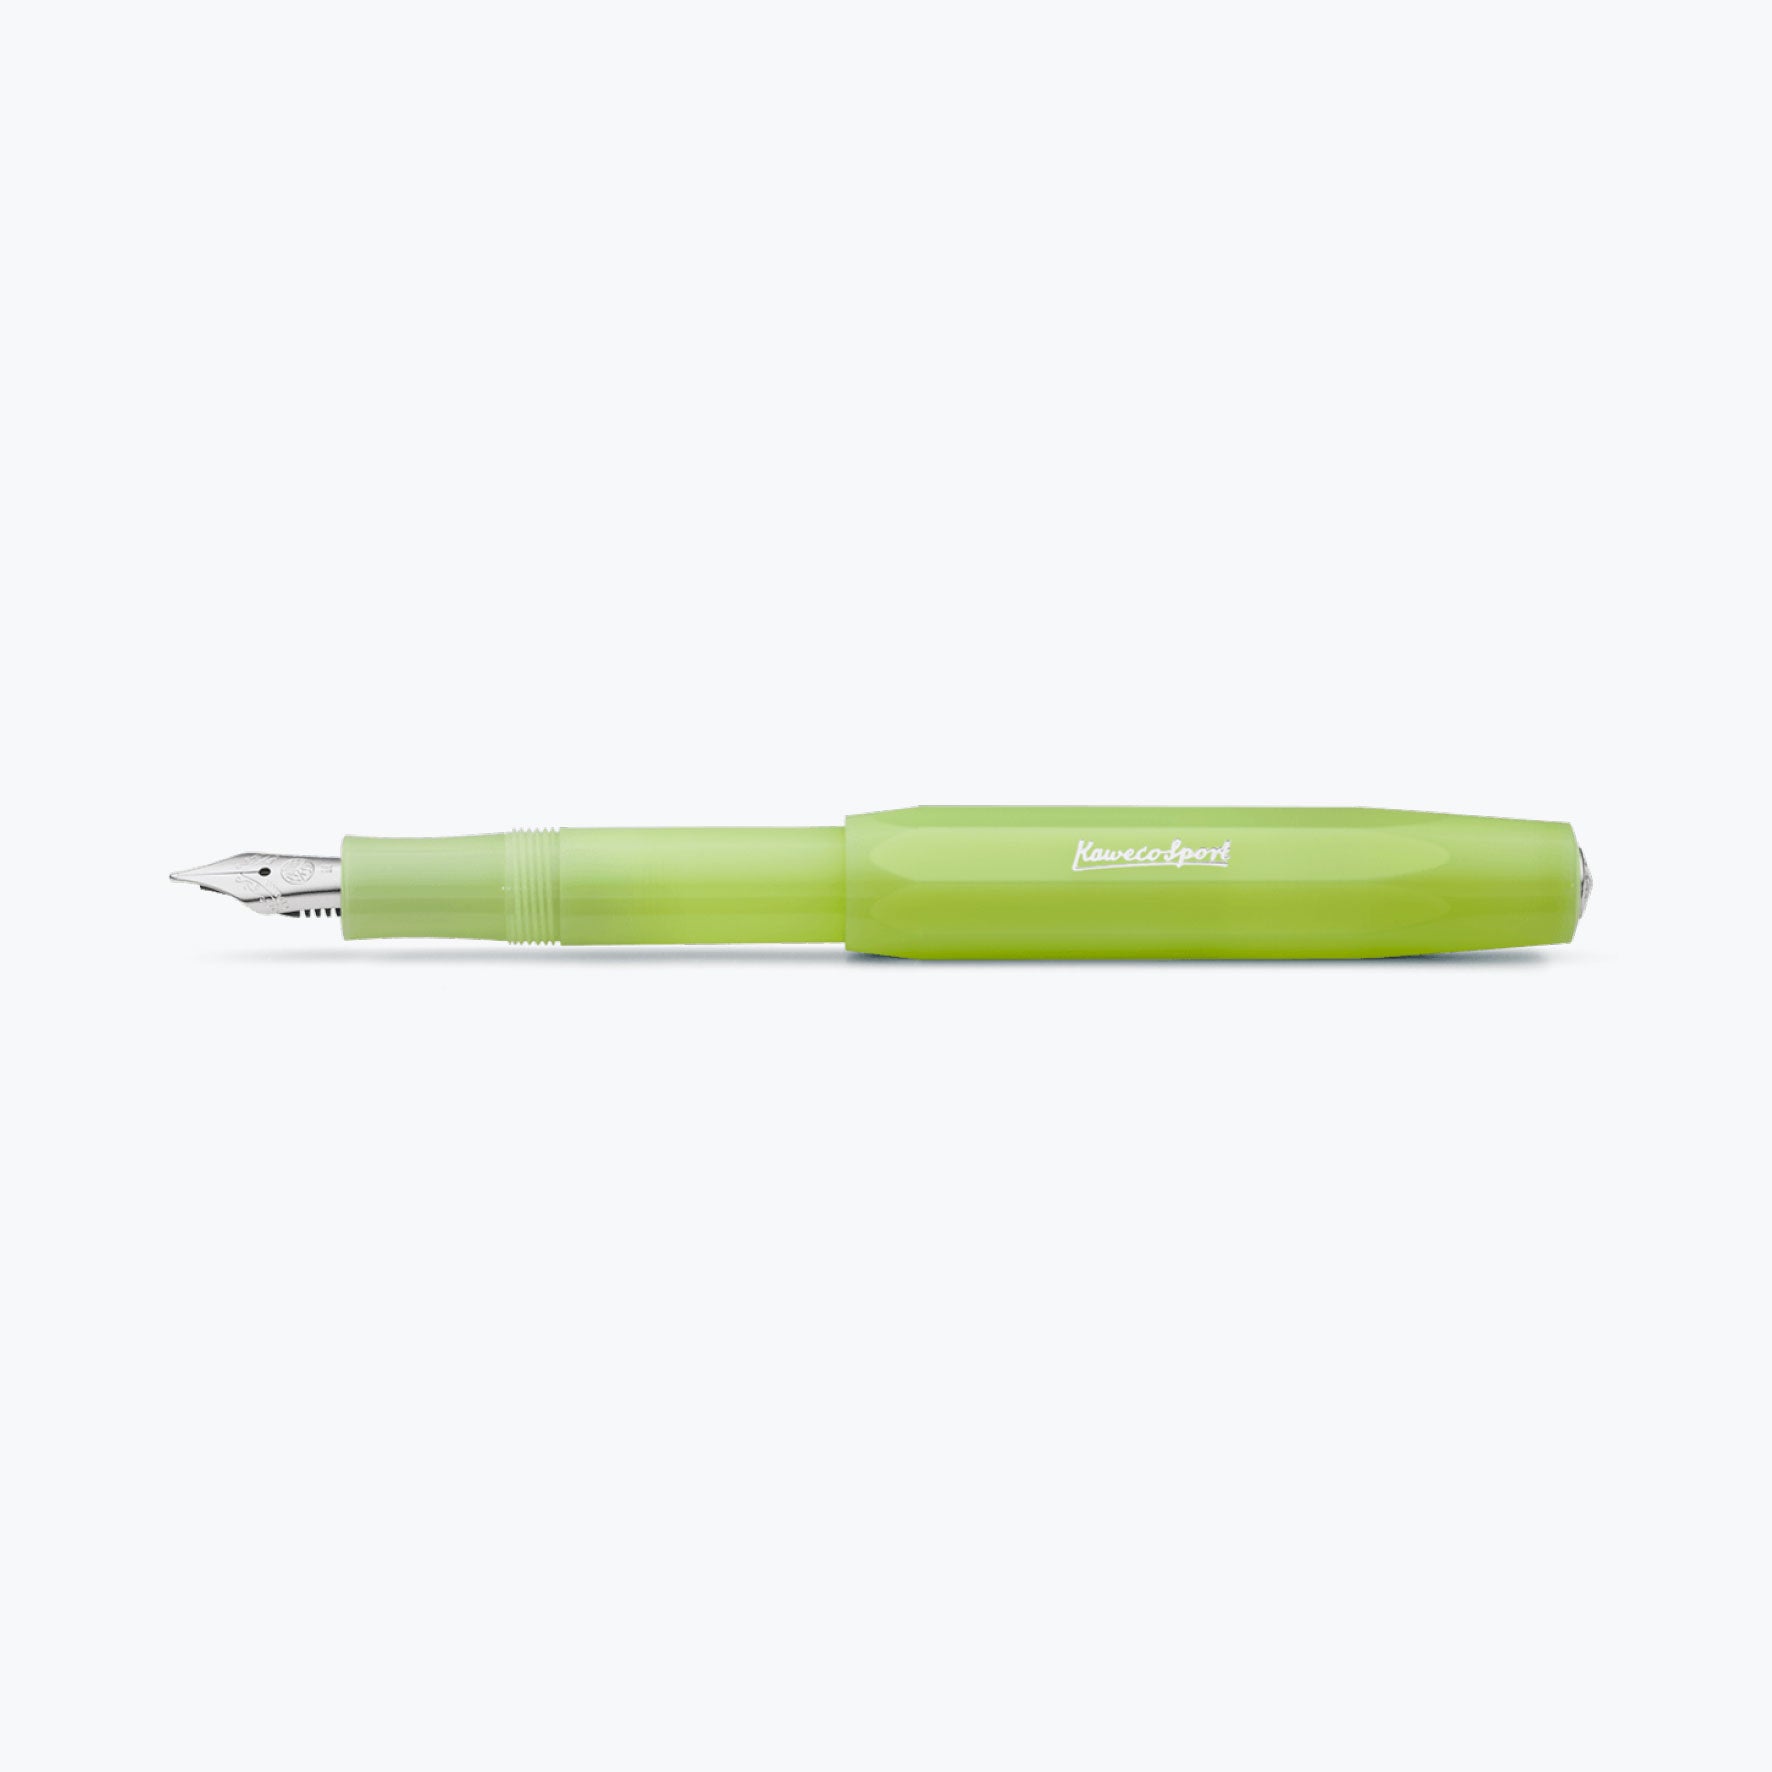 Kaweco - Fountain Pen - Frosted Sport - Lime <Outgoing>